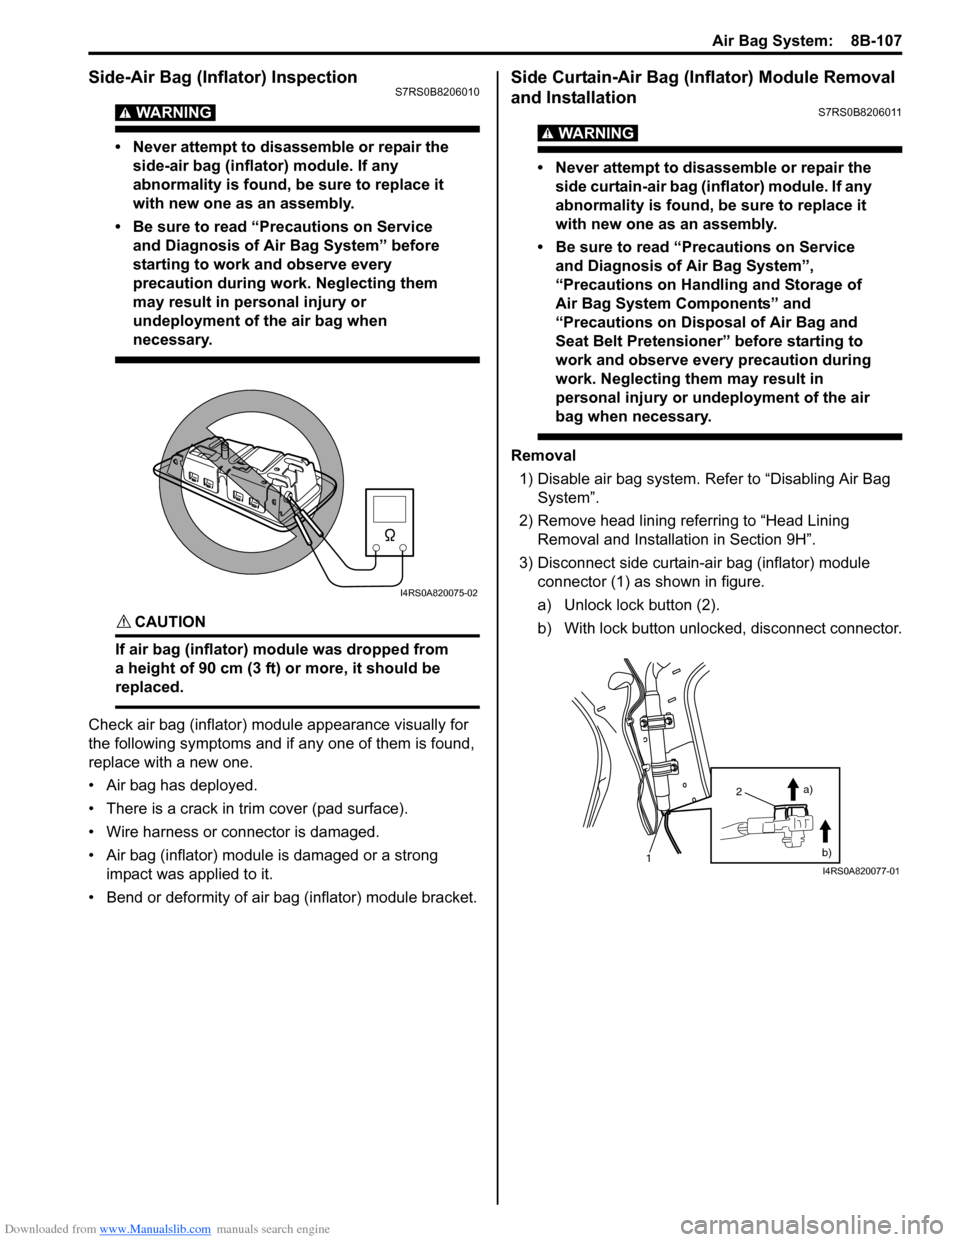 SUZUKI SWIFT 2006 2.G Service User Guide Downloaded from www.Manualslib.com manuals search engine Air Bag System:  8B-107
Side-Air Bag (Inflator) InspectionS7RS0B8206010
WARNING! 
• Never attempt to disassemble or repair the side-air bag (